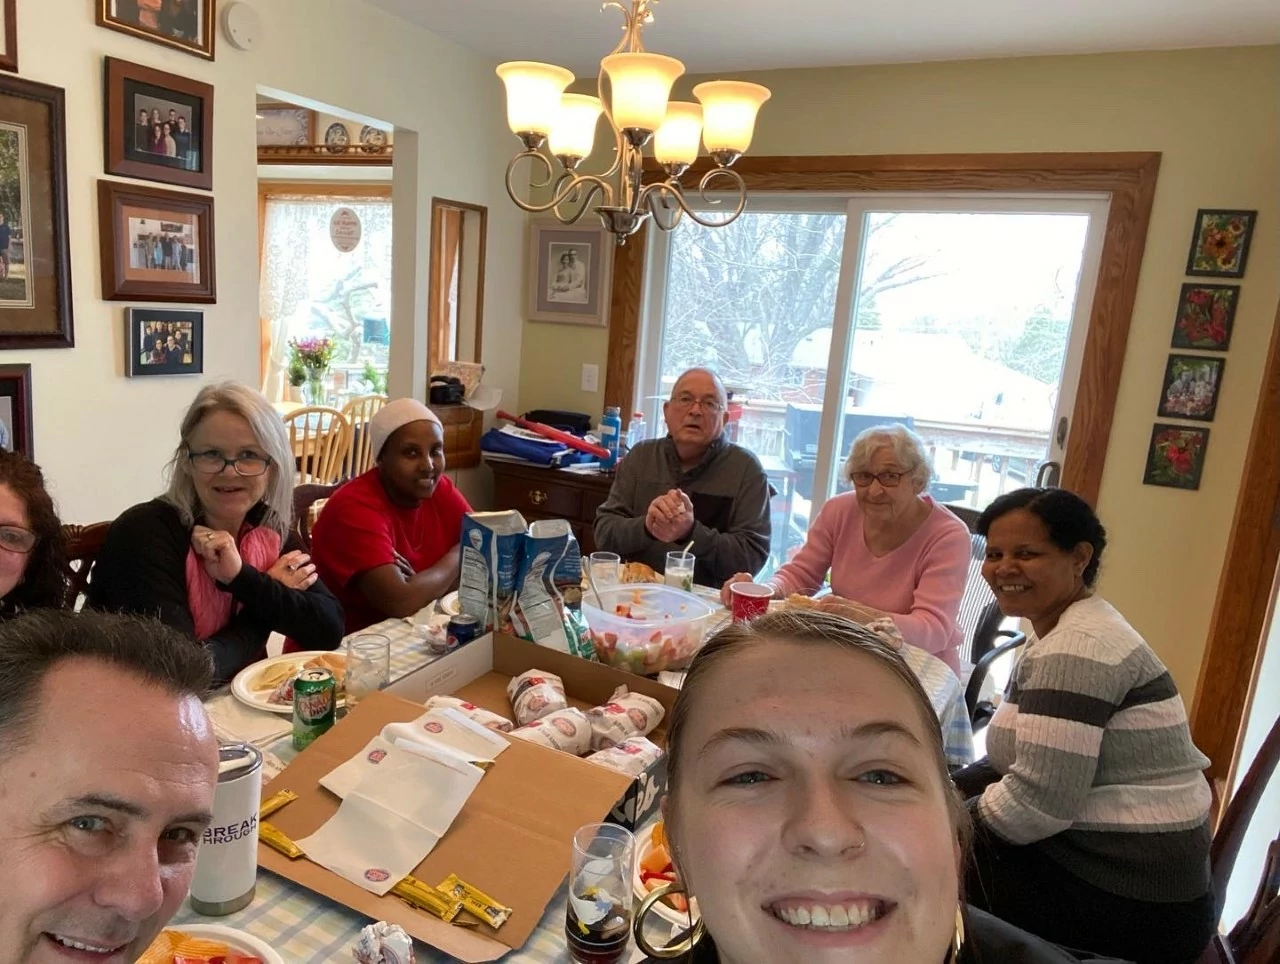 Senior Helpers Roseville brought over lunch for Carol's birthday in April. Our owner, office manager, client services coordinator, nurse, and caregivers had a great time chatting with their family!